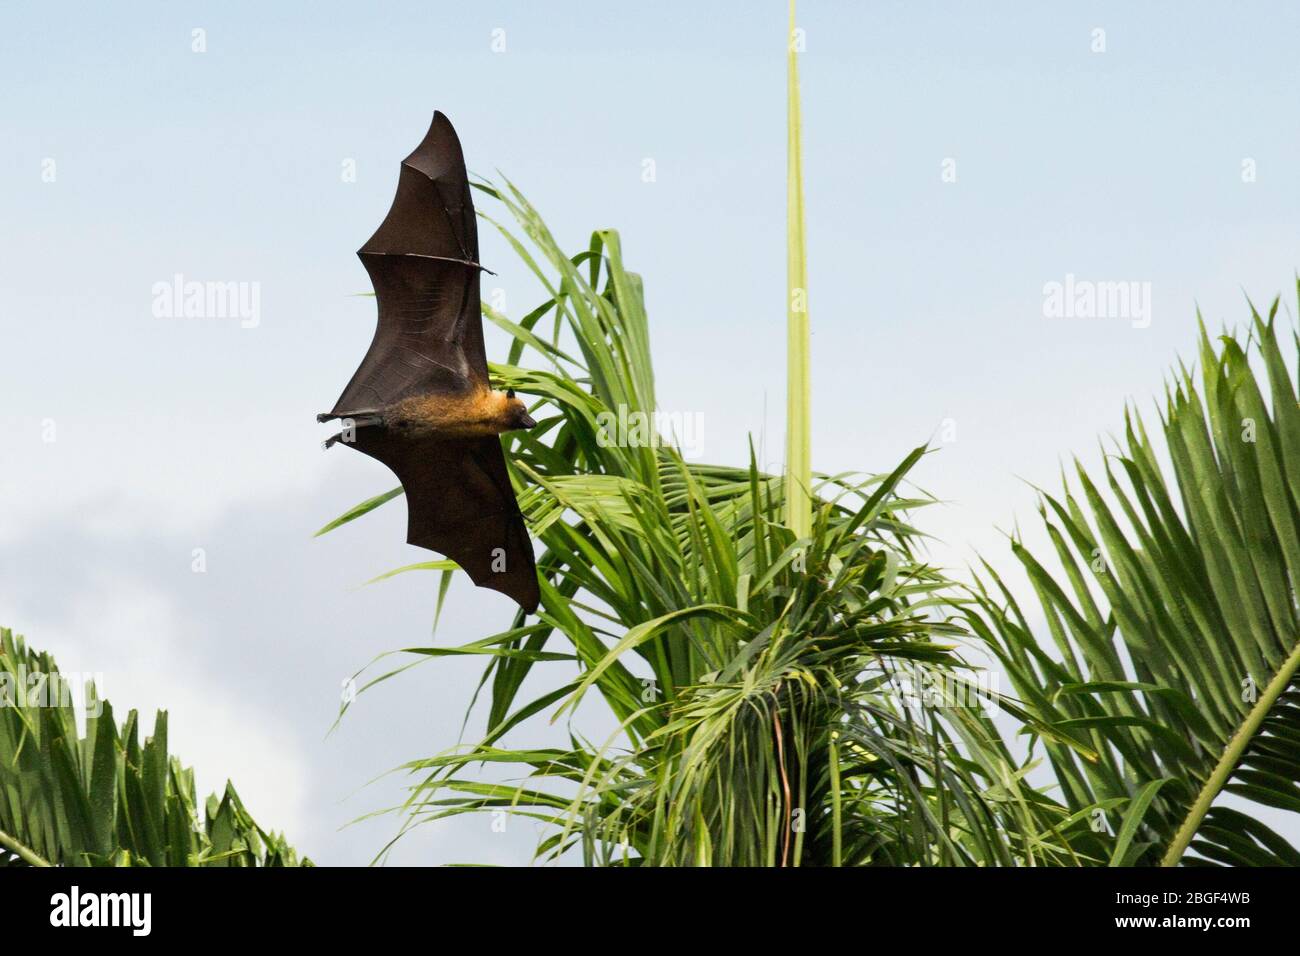 The Seychelles fruit bat or Seychelles flying fox (Pteropus seychellensis) is a megabat found on the granitic islands of Seychelles, and on the Comoro Stock Photo